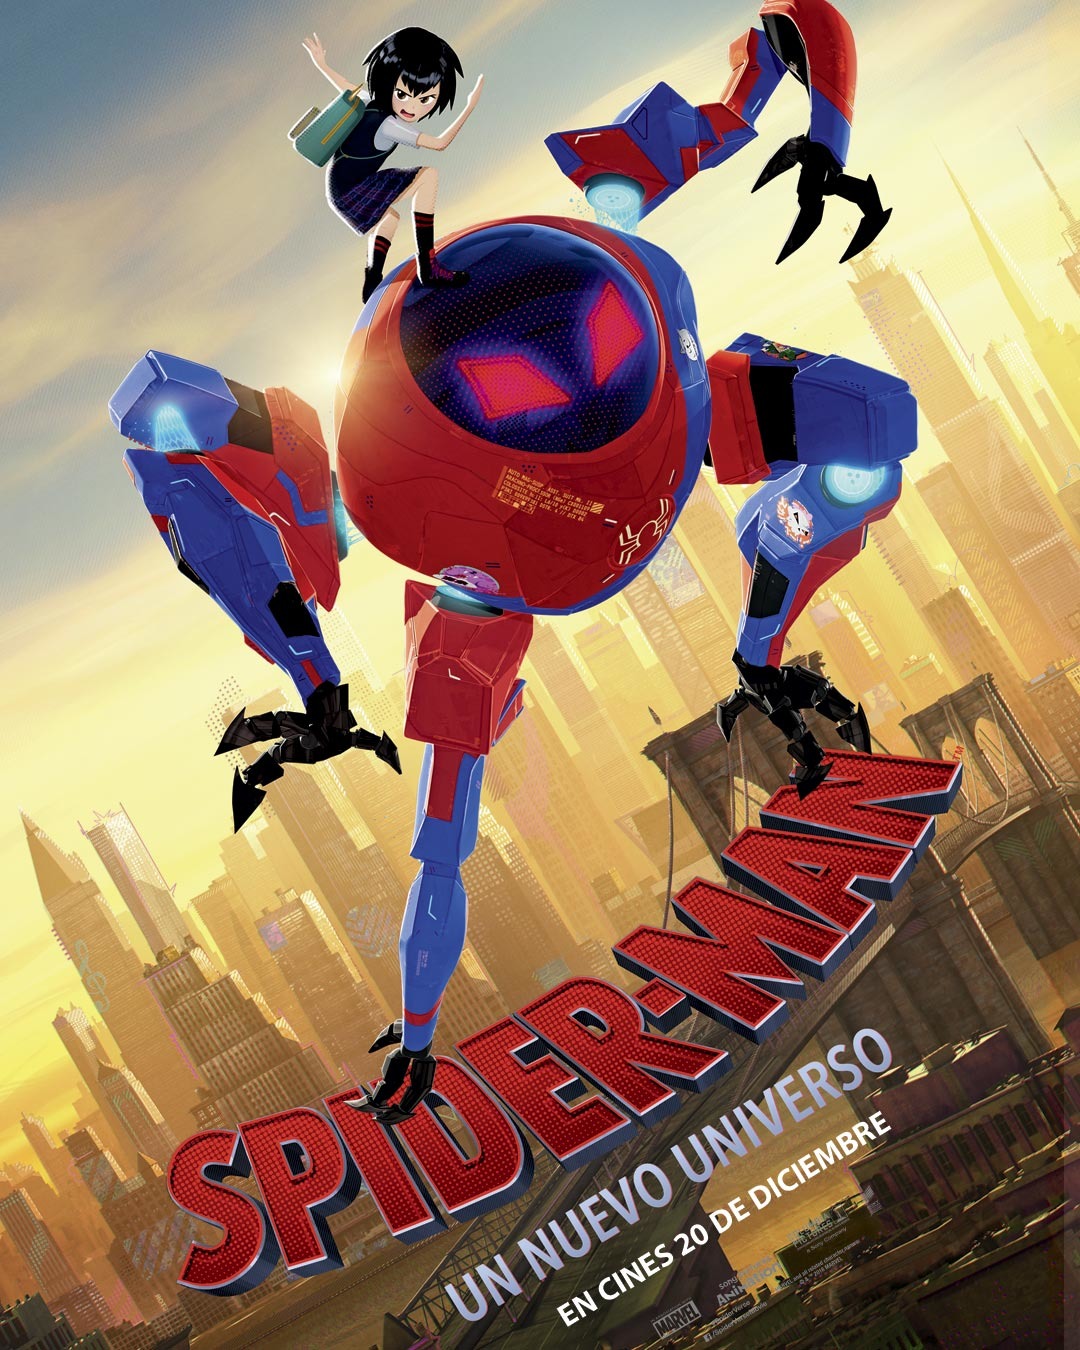 Extra Large Movie Poster Image for Spider-Man: Into the Spider-Verse (#11 of 21)